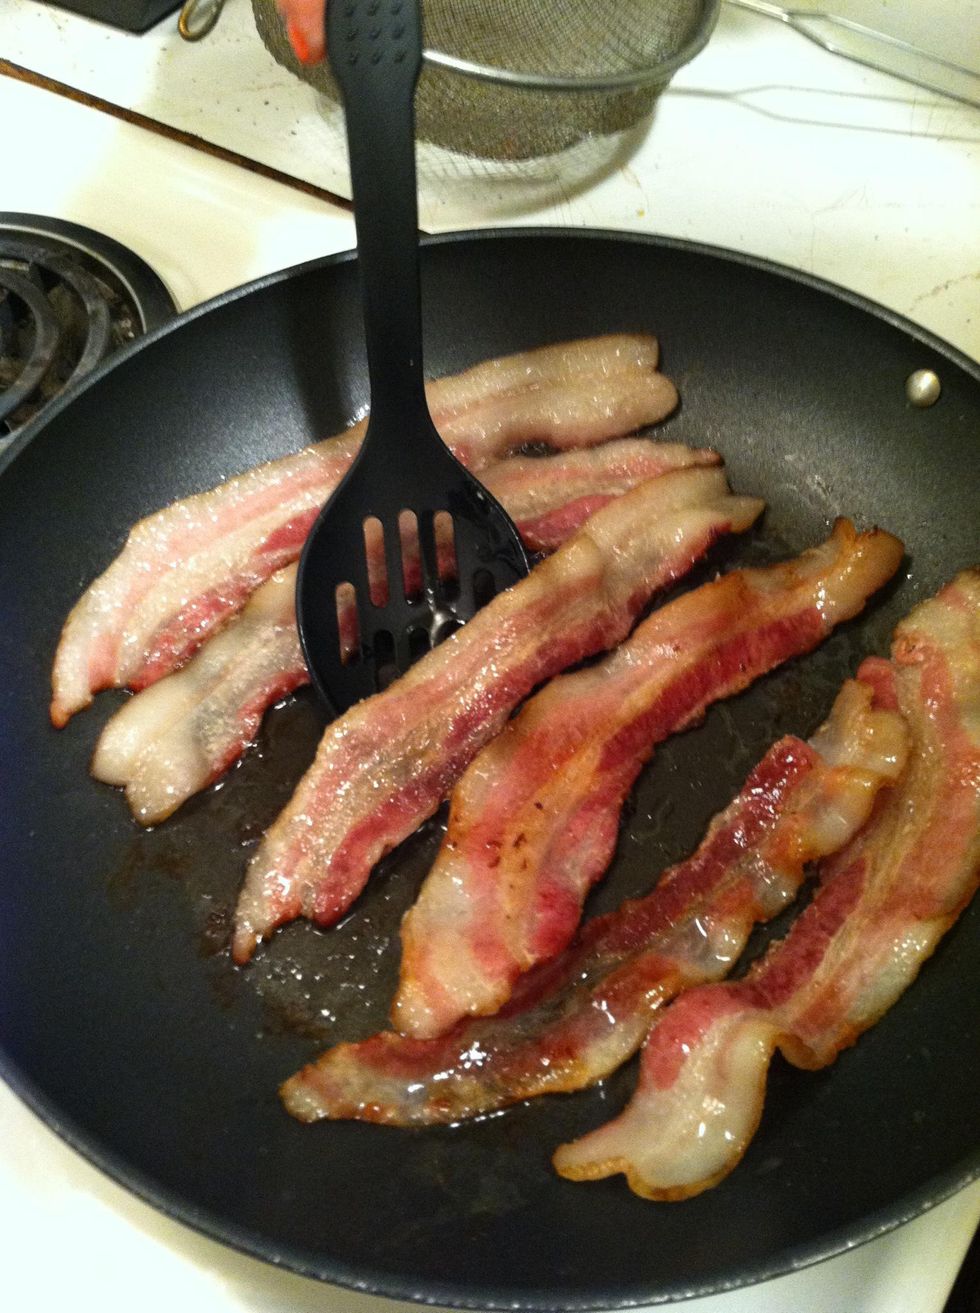 How to make perfect bacon - B+C Guides